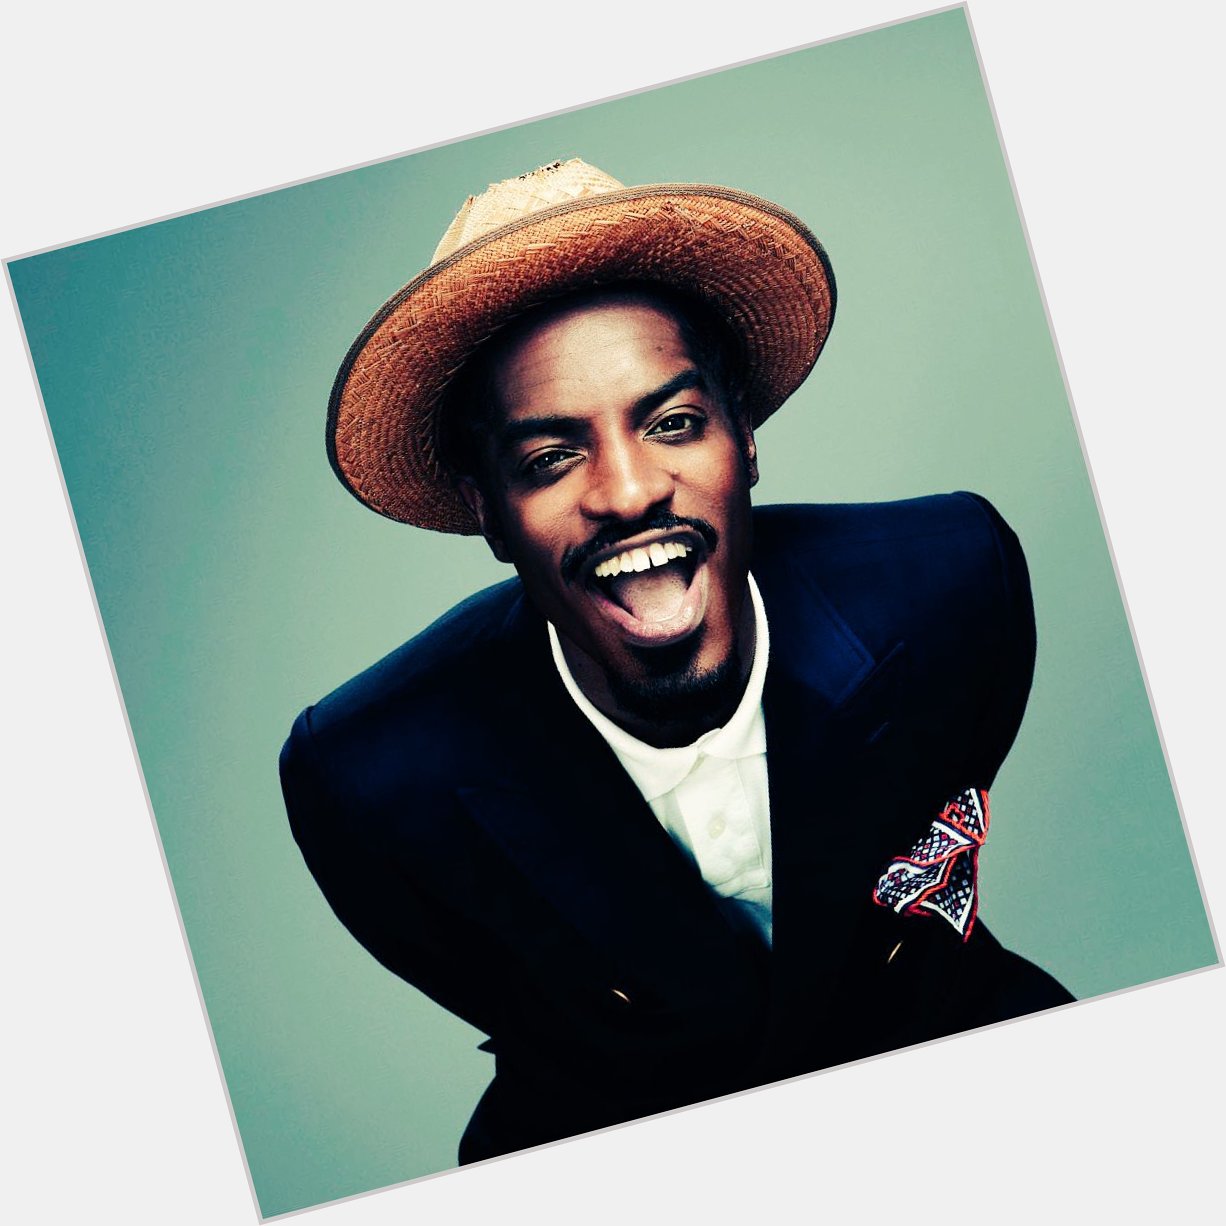 Turn up some 3 Stacks today! Happy Birthday Andre 3000.    